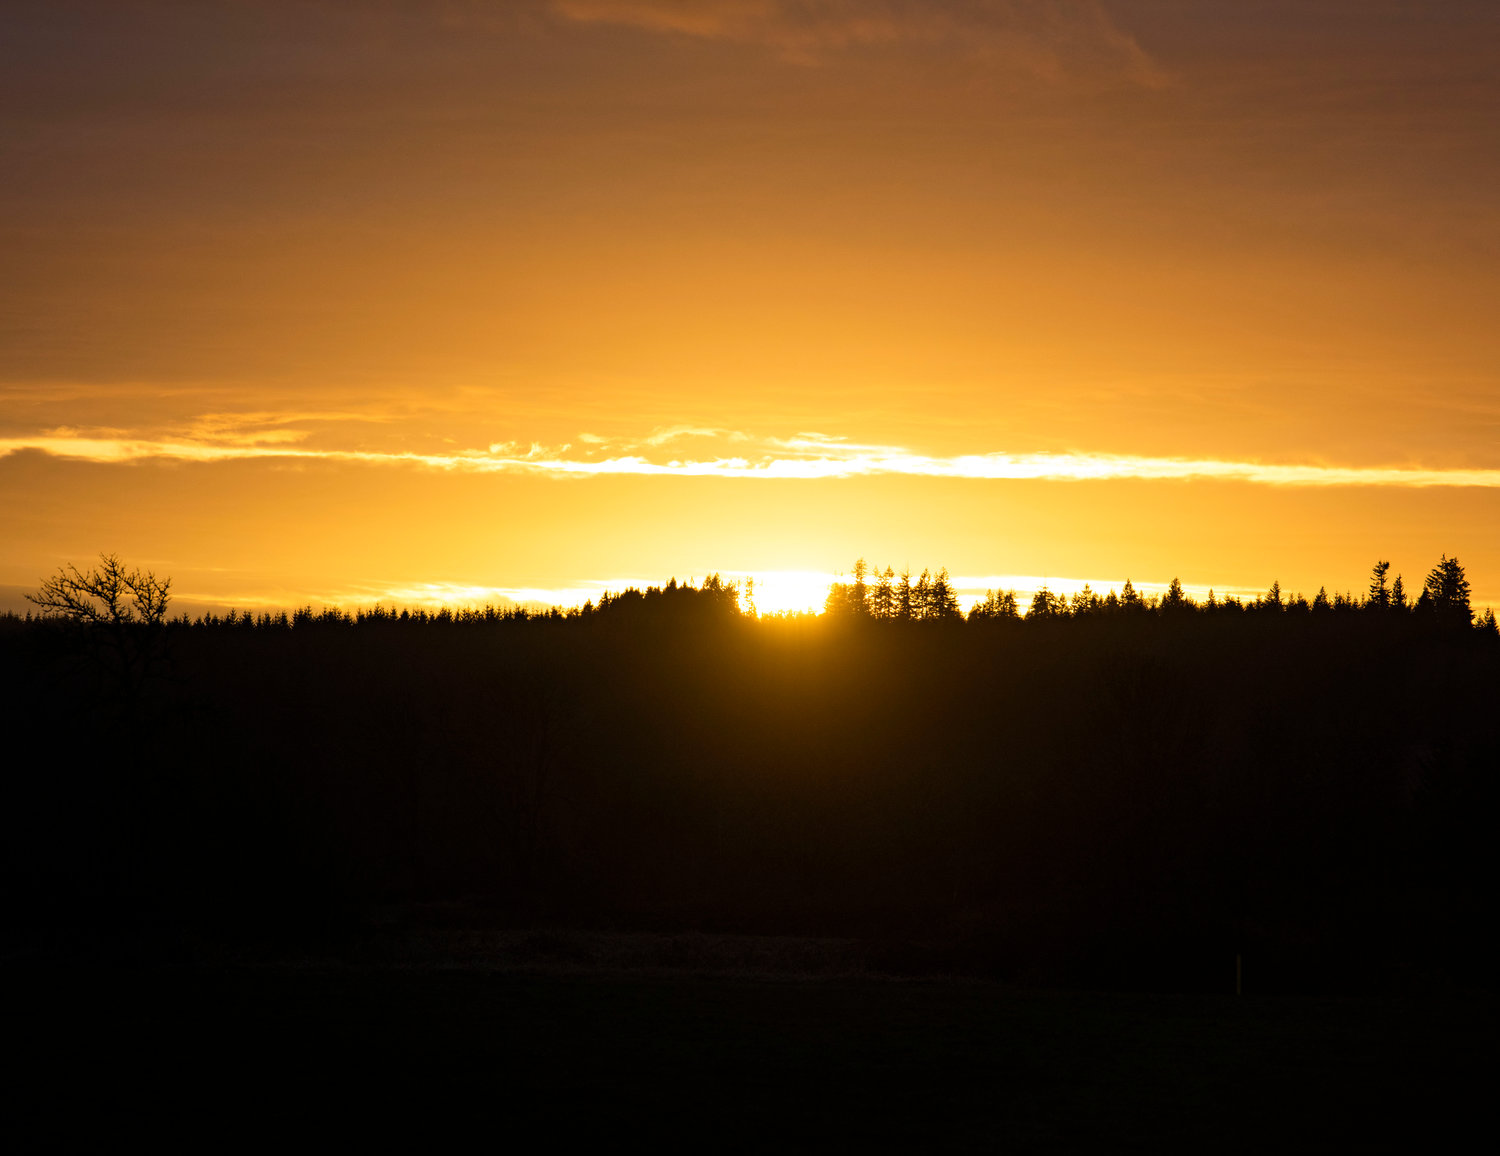 FILE PHOTO — The sun sets behind trees between Centralia and Chehalis.